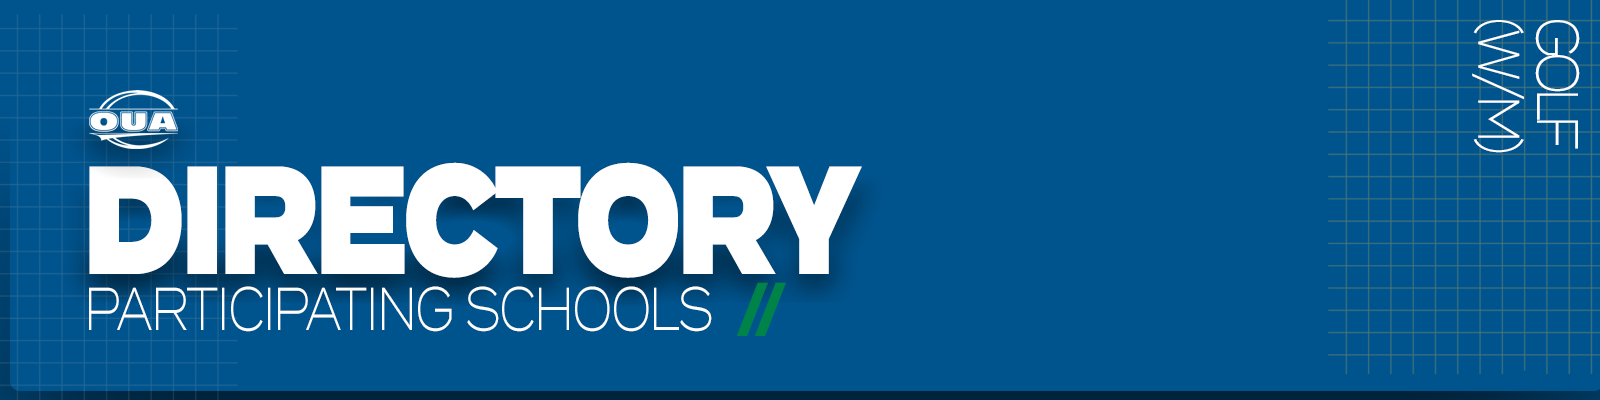 Predominantly blue graphic with large white text on the left side that reads 'Directory, Participating Schools' and small white vertical text on the right side that reads 'Golf'